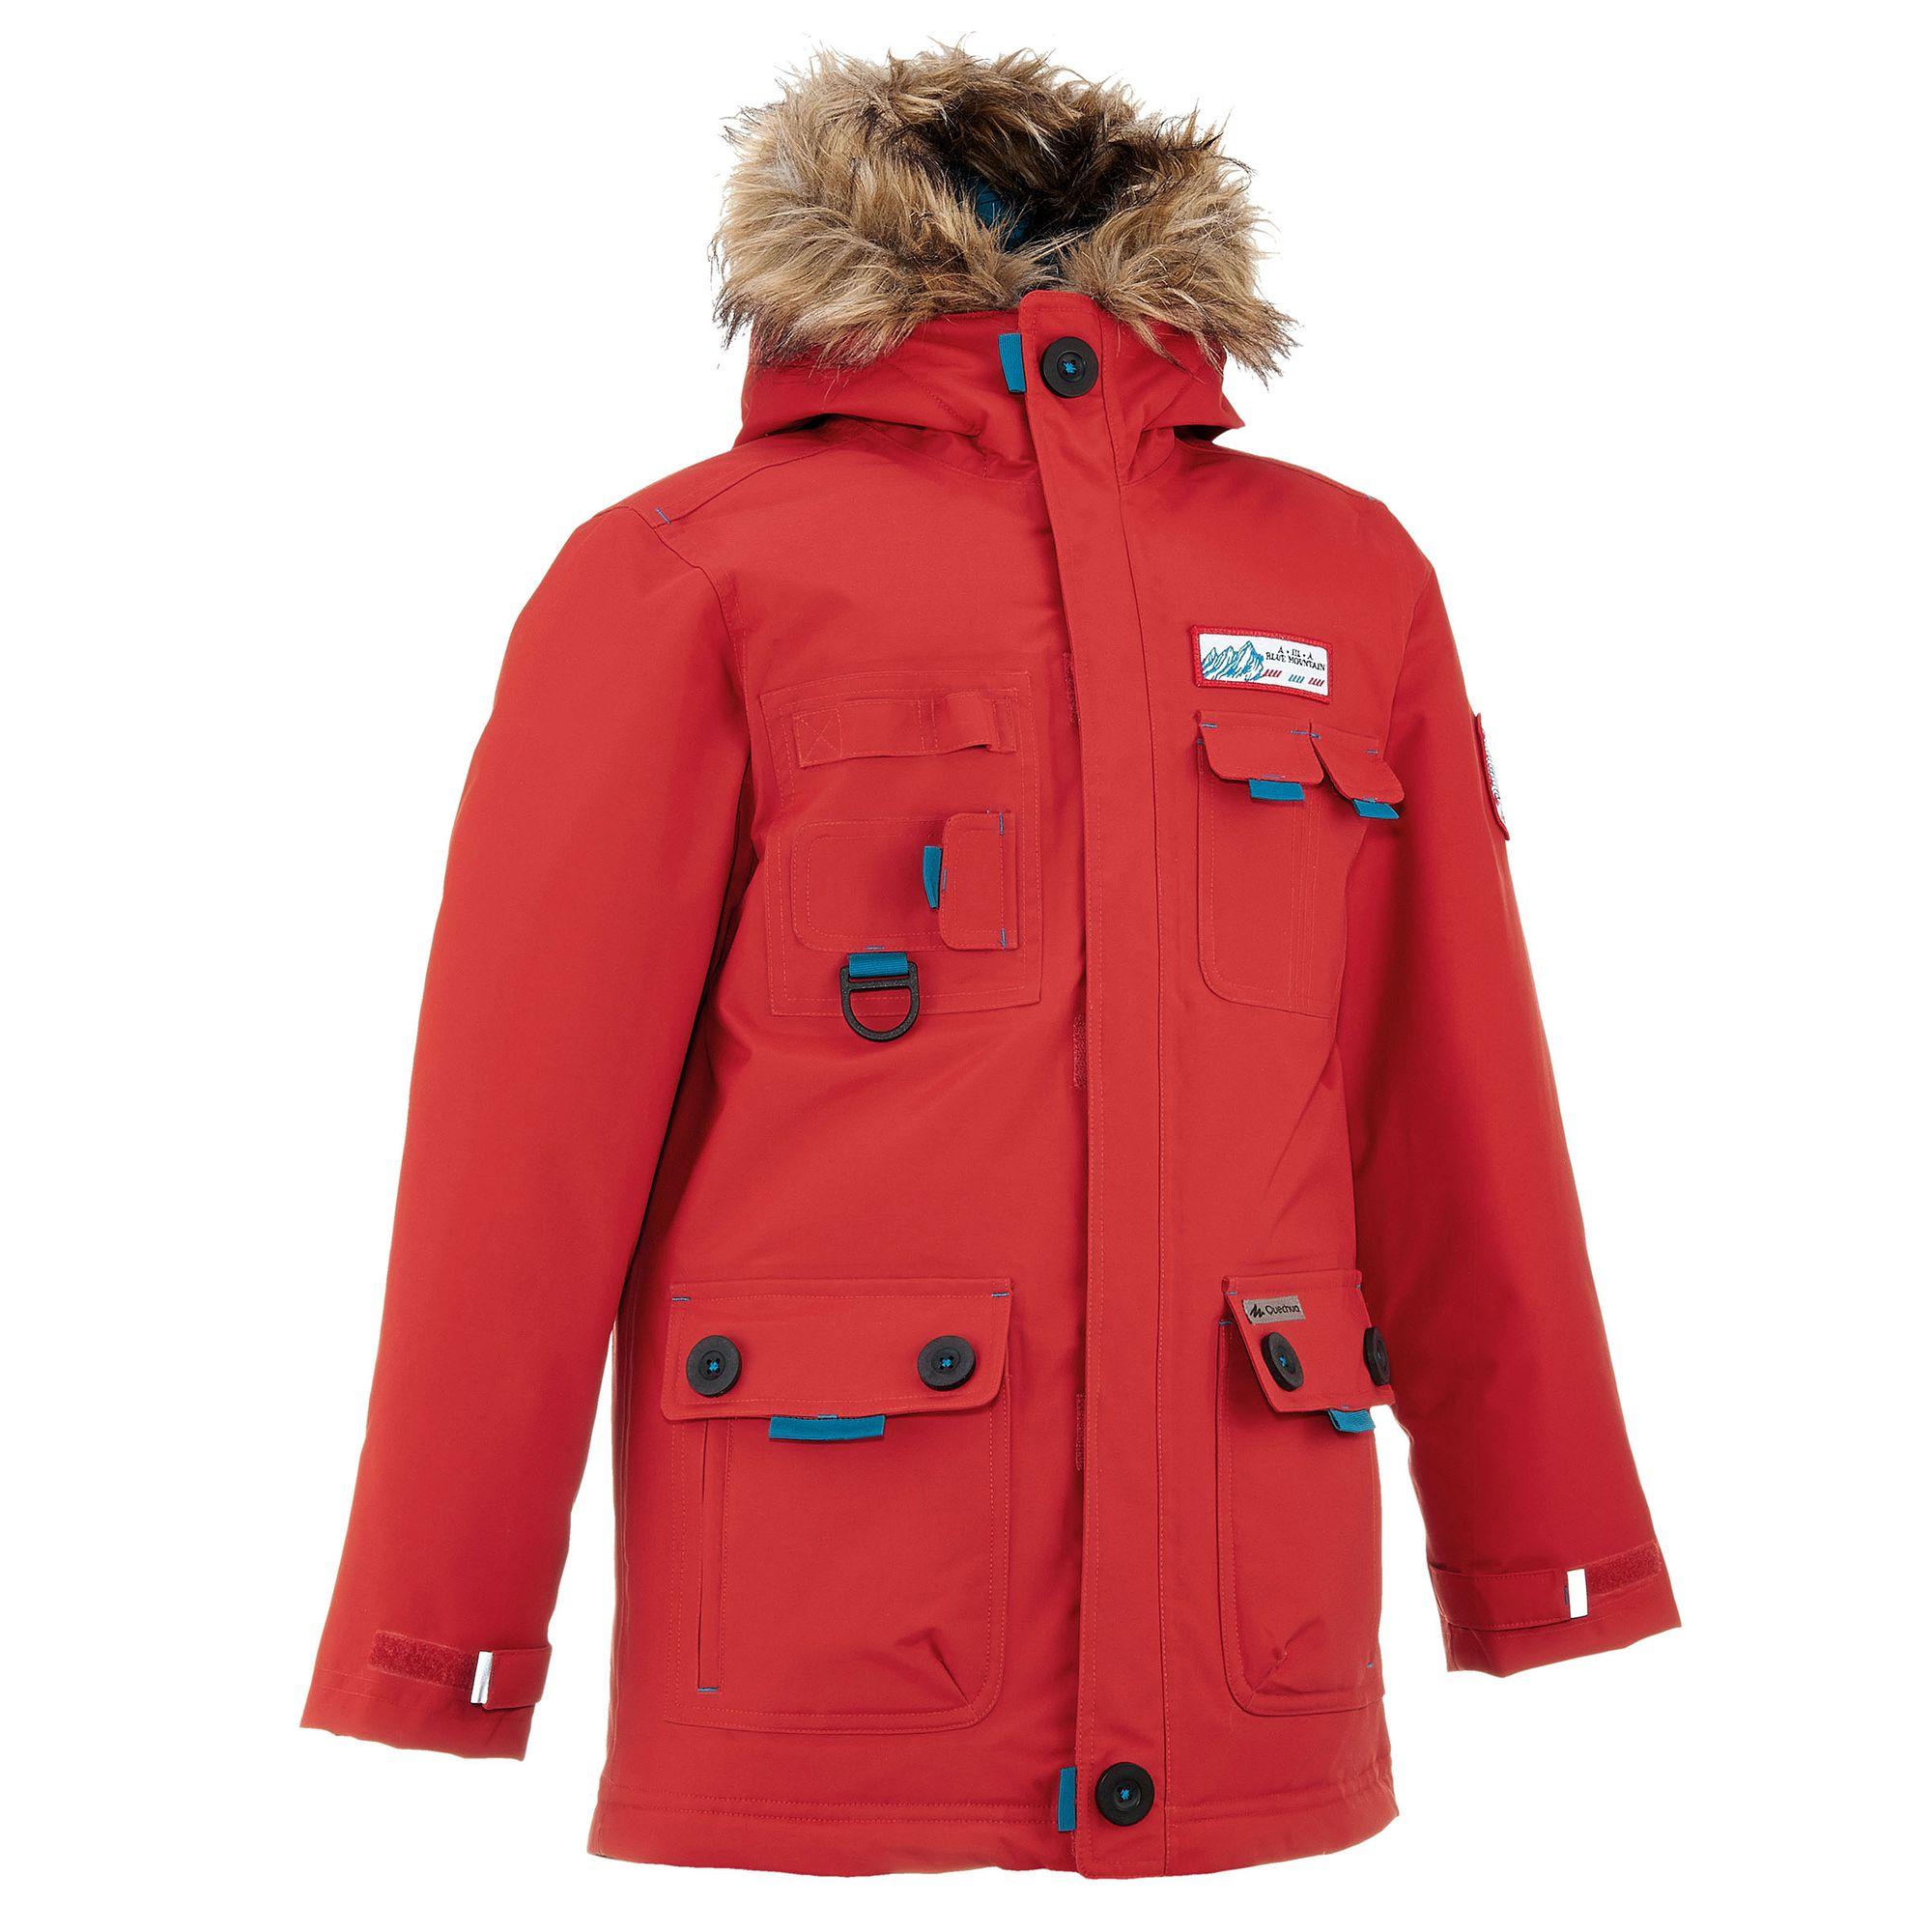 QUECHUA Arpenaz 900 Boys' Hiking Jacket Red